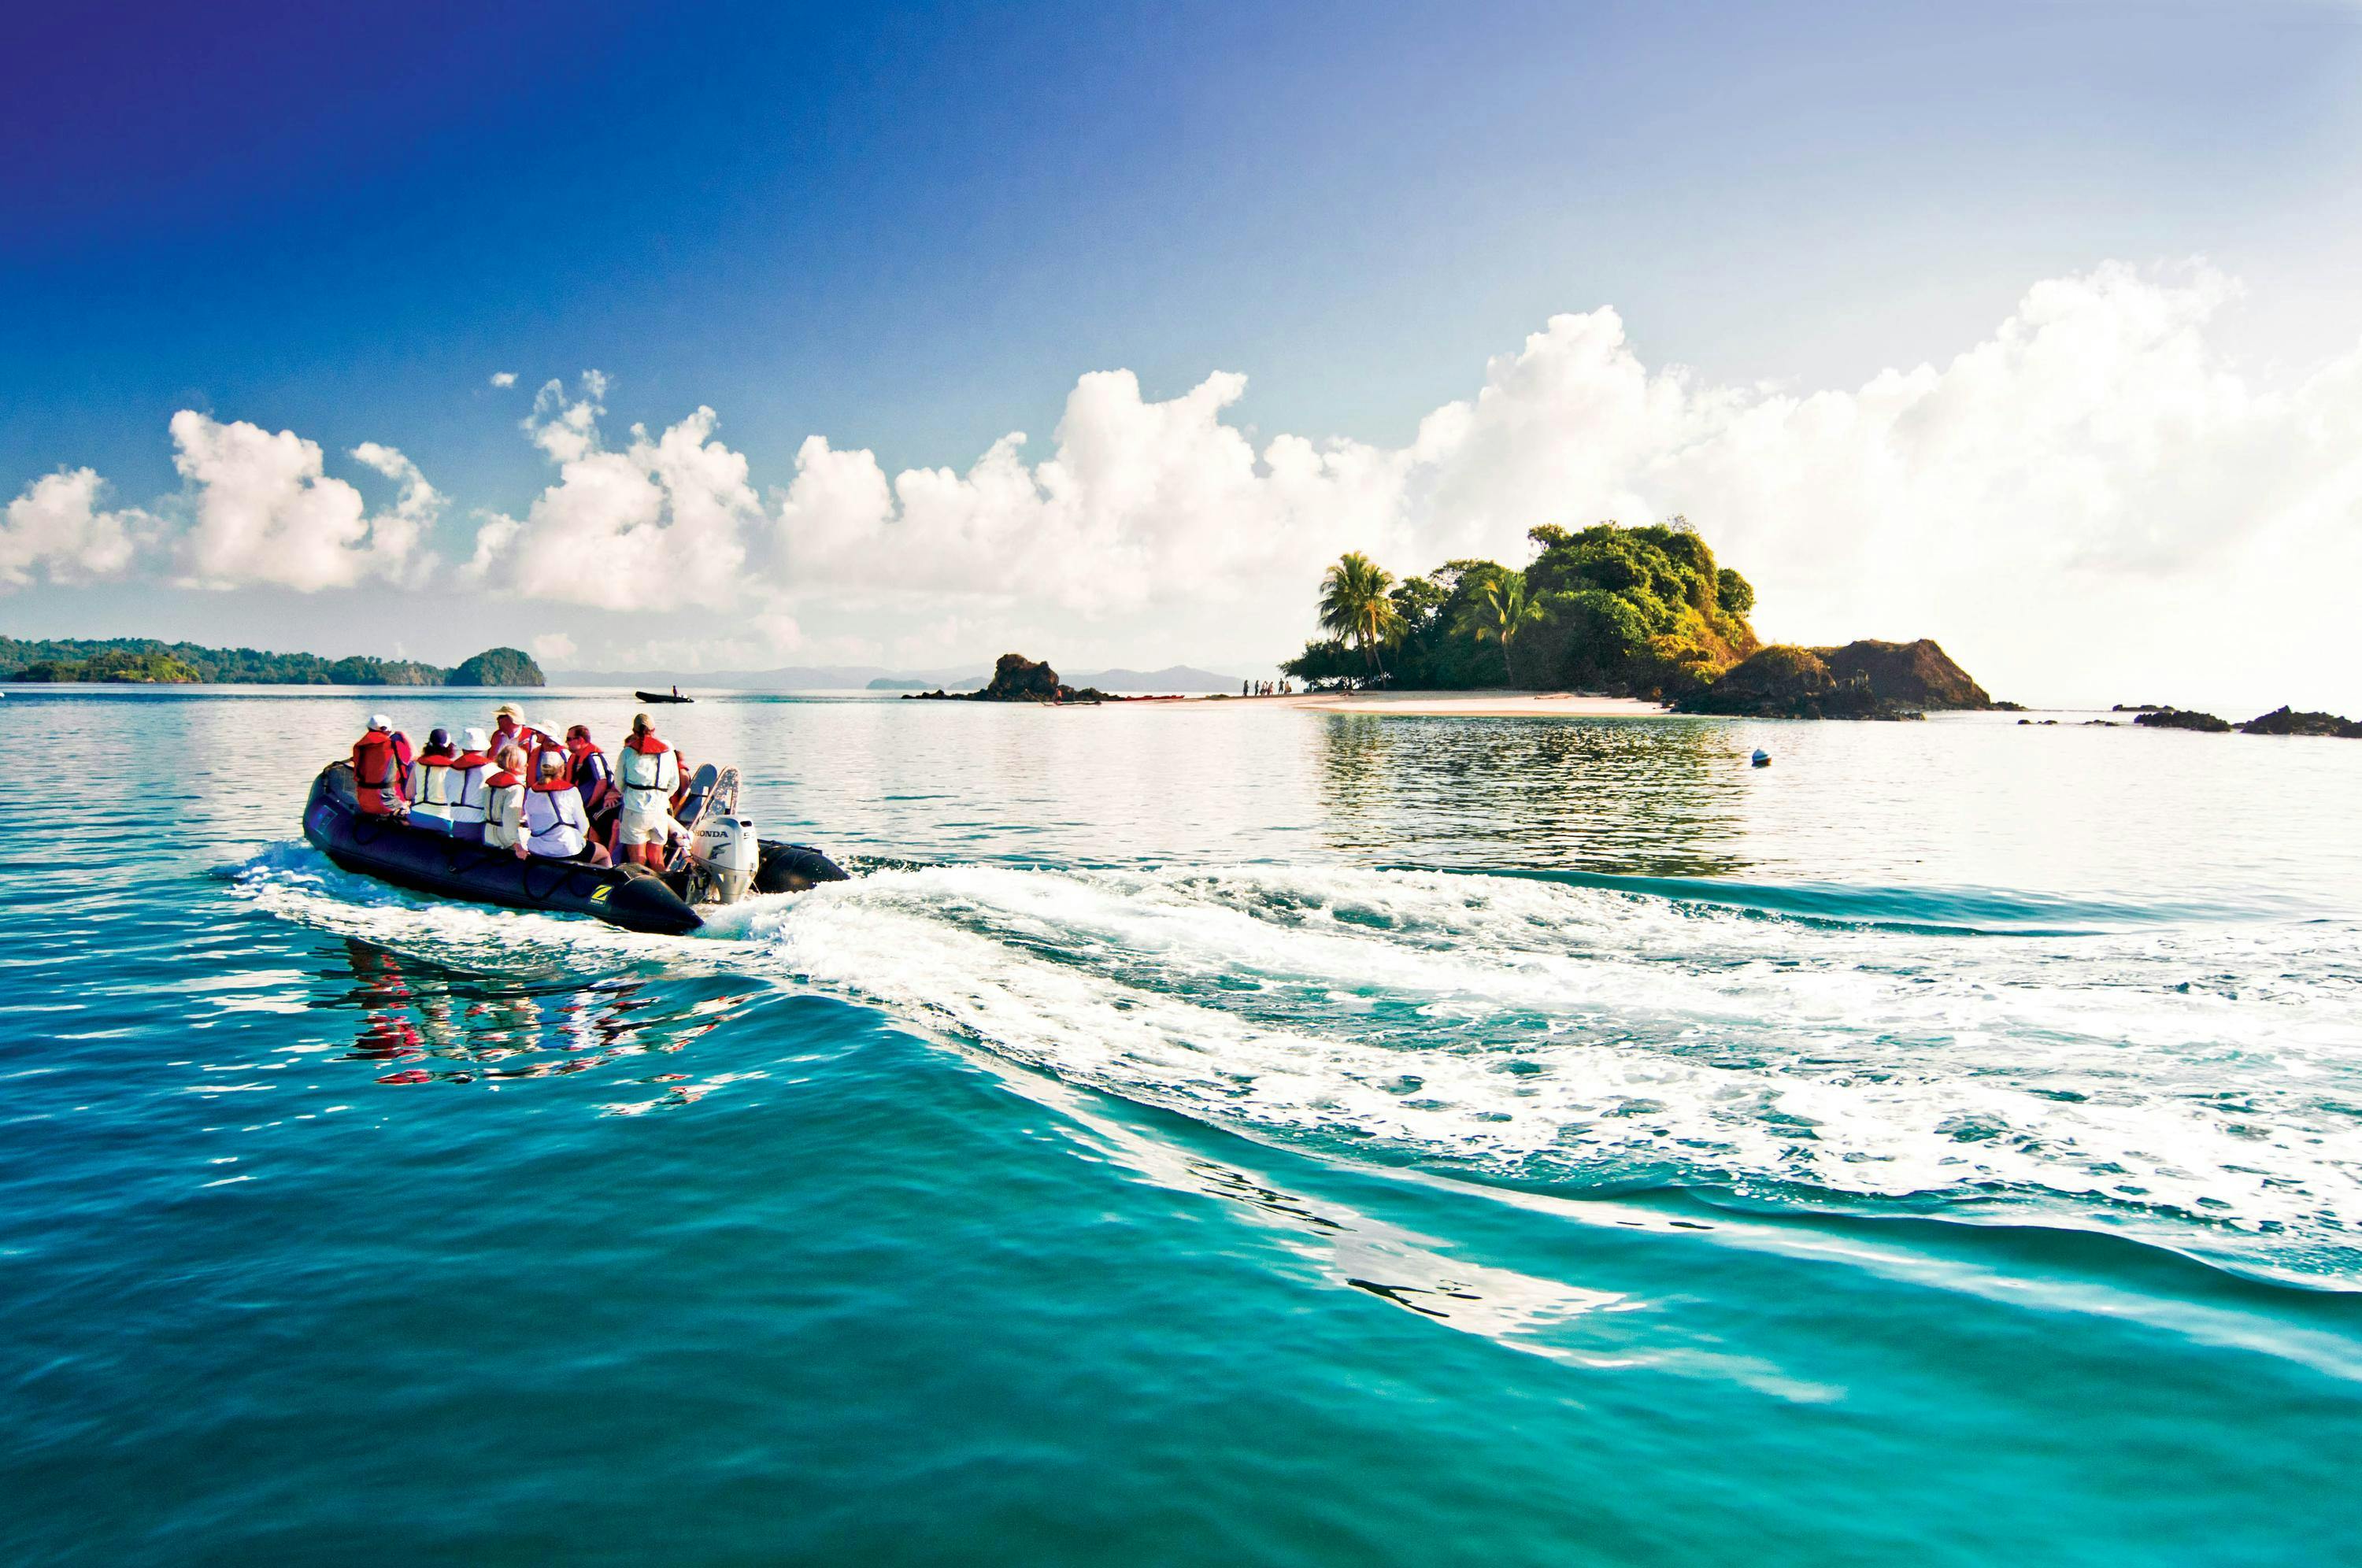 Guests explore by zodiac mangrove-lined beaches and islands in San Jose, Costa Rica, Central America